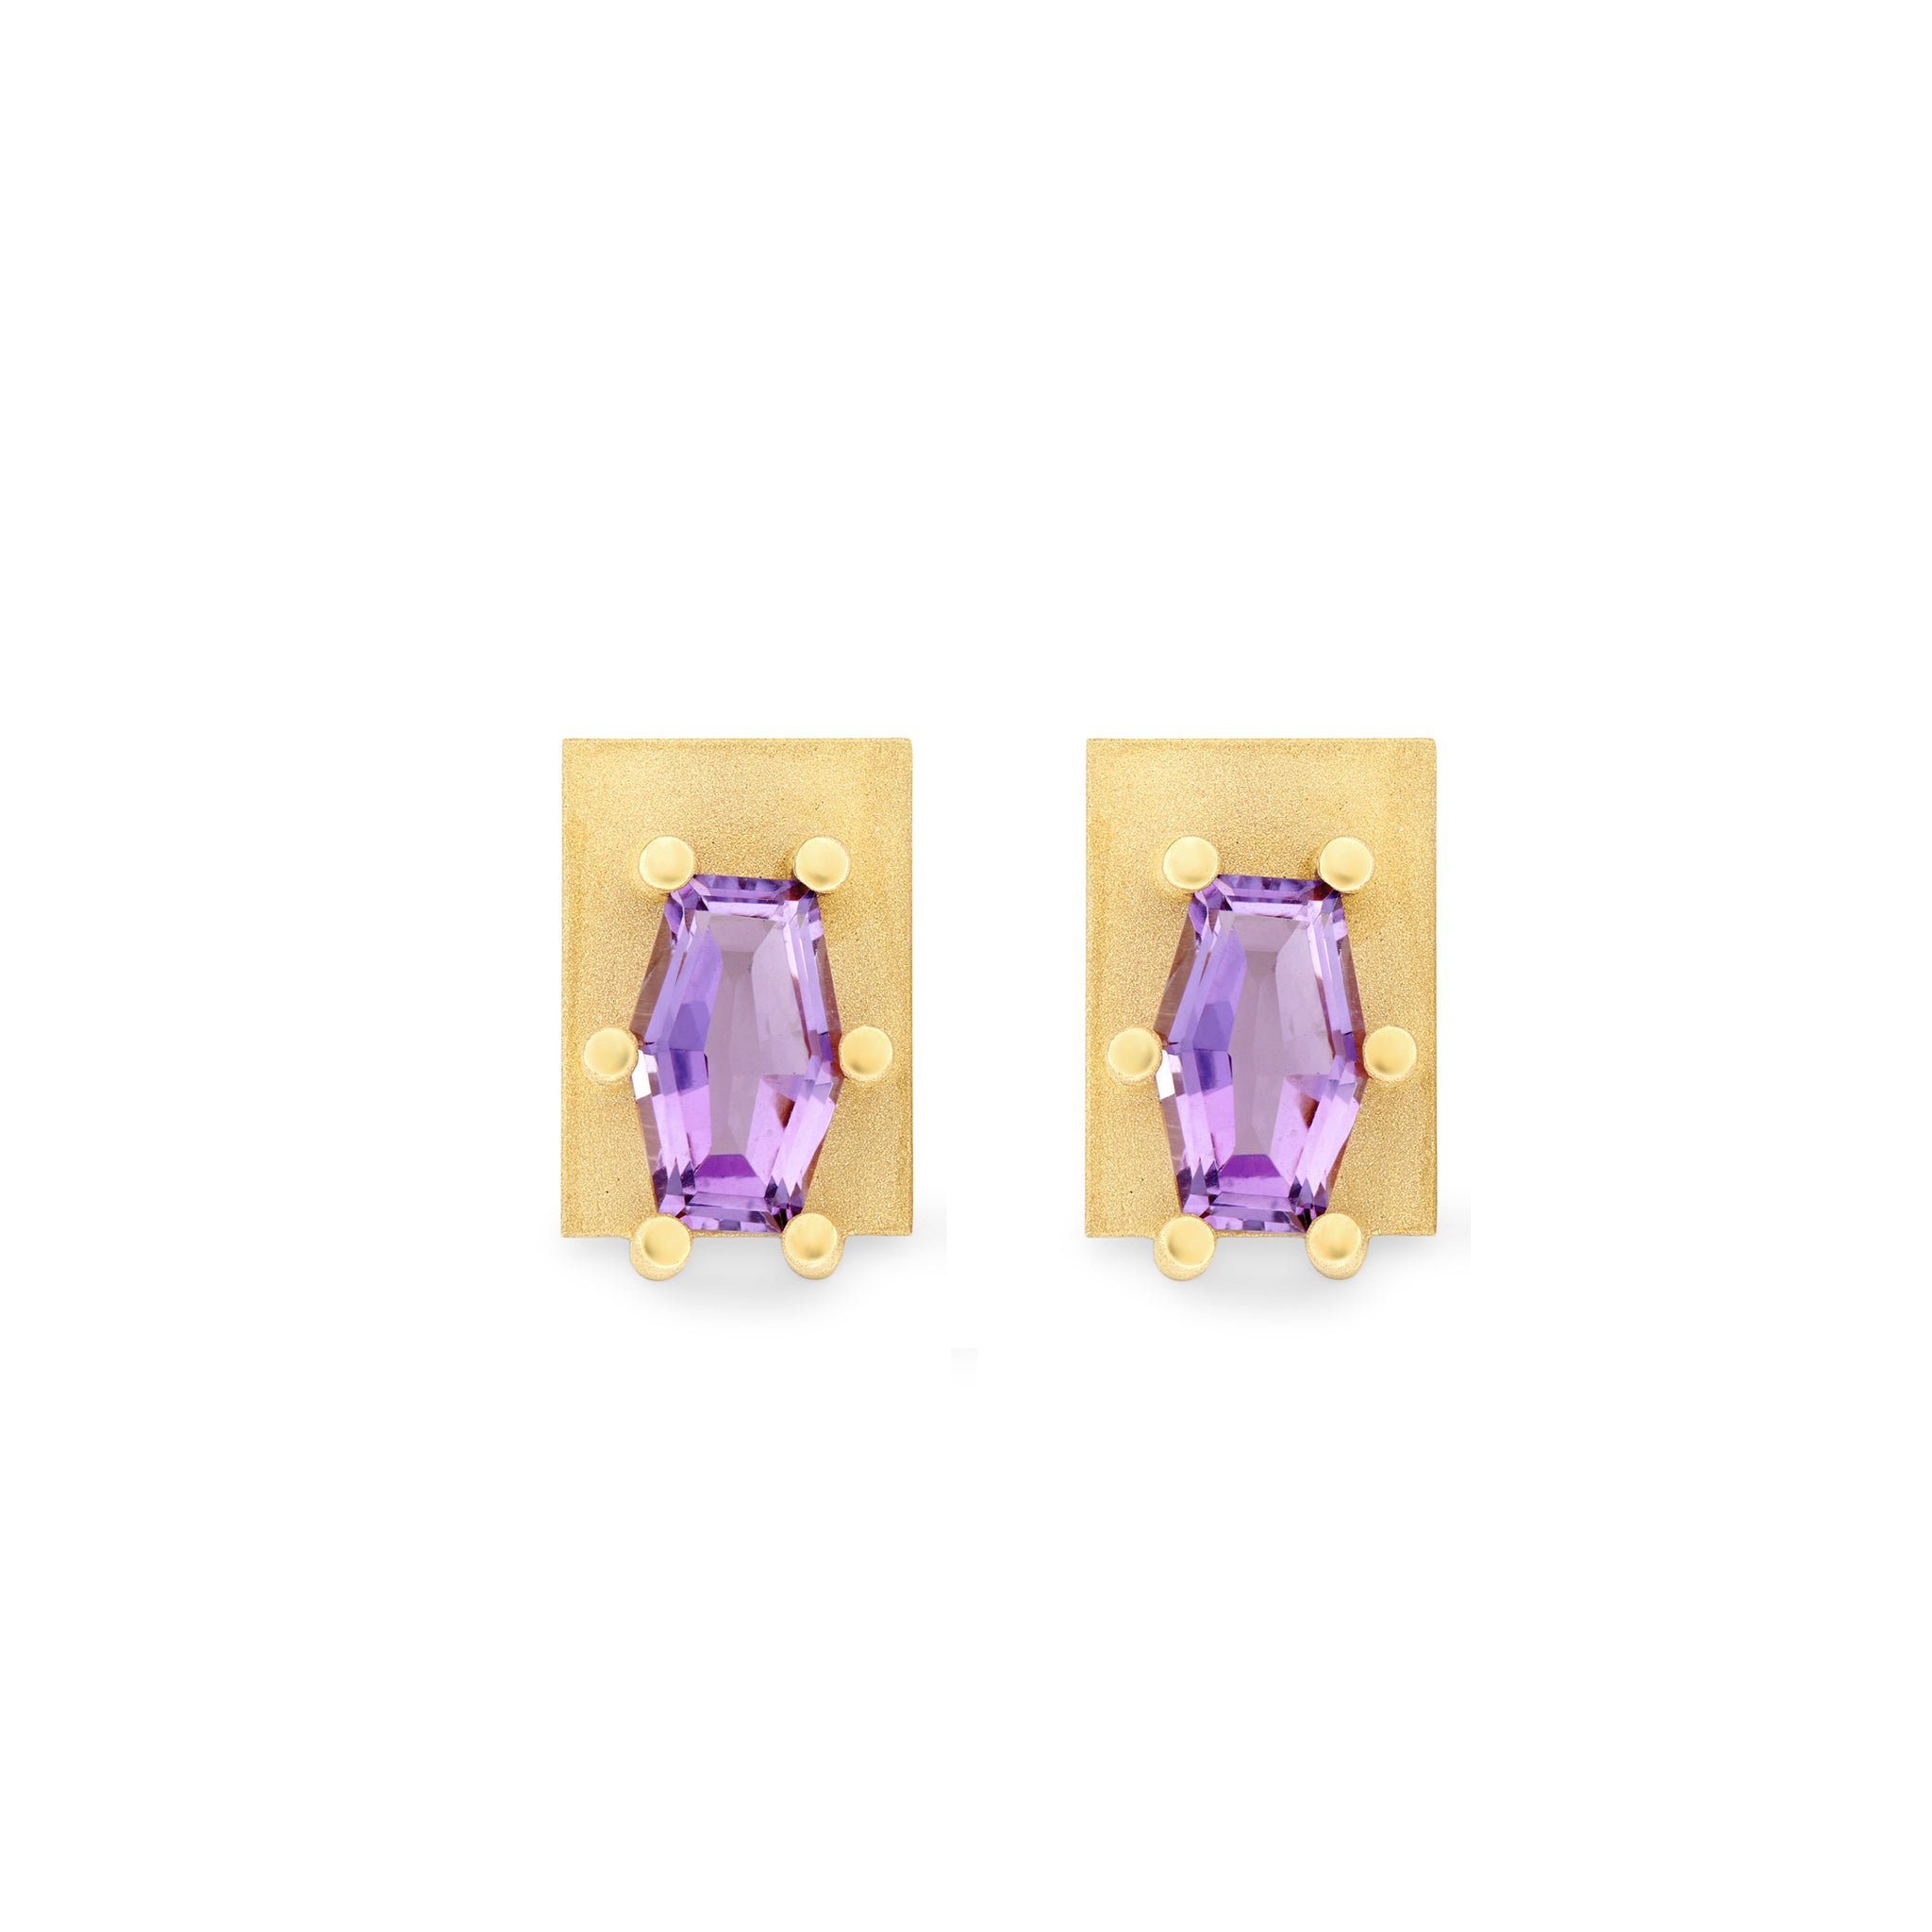 Ravishing Amethysts: The Auralandi Earrings showcase the captivating beauty of fancy-cut dark amethysts. These gemstones, carefully chosen for their exquisite color and clarity, radiate an aura of mystique and allure. The rich hues of amethysts add a touch of glamour and refinement to these extraordinary earrings.